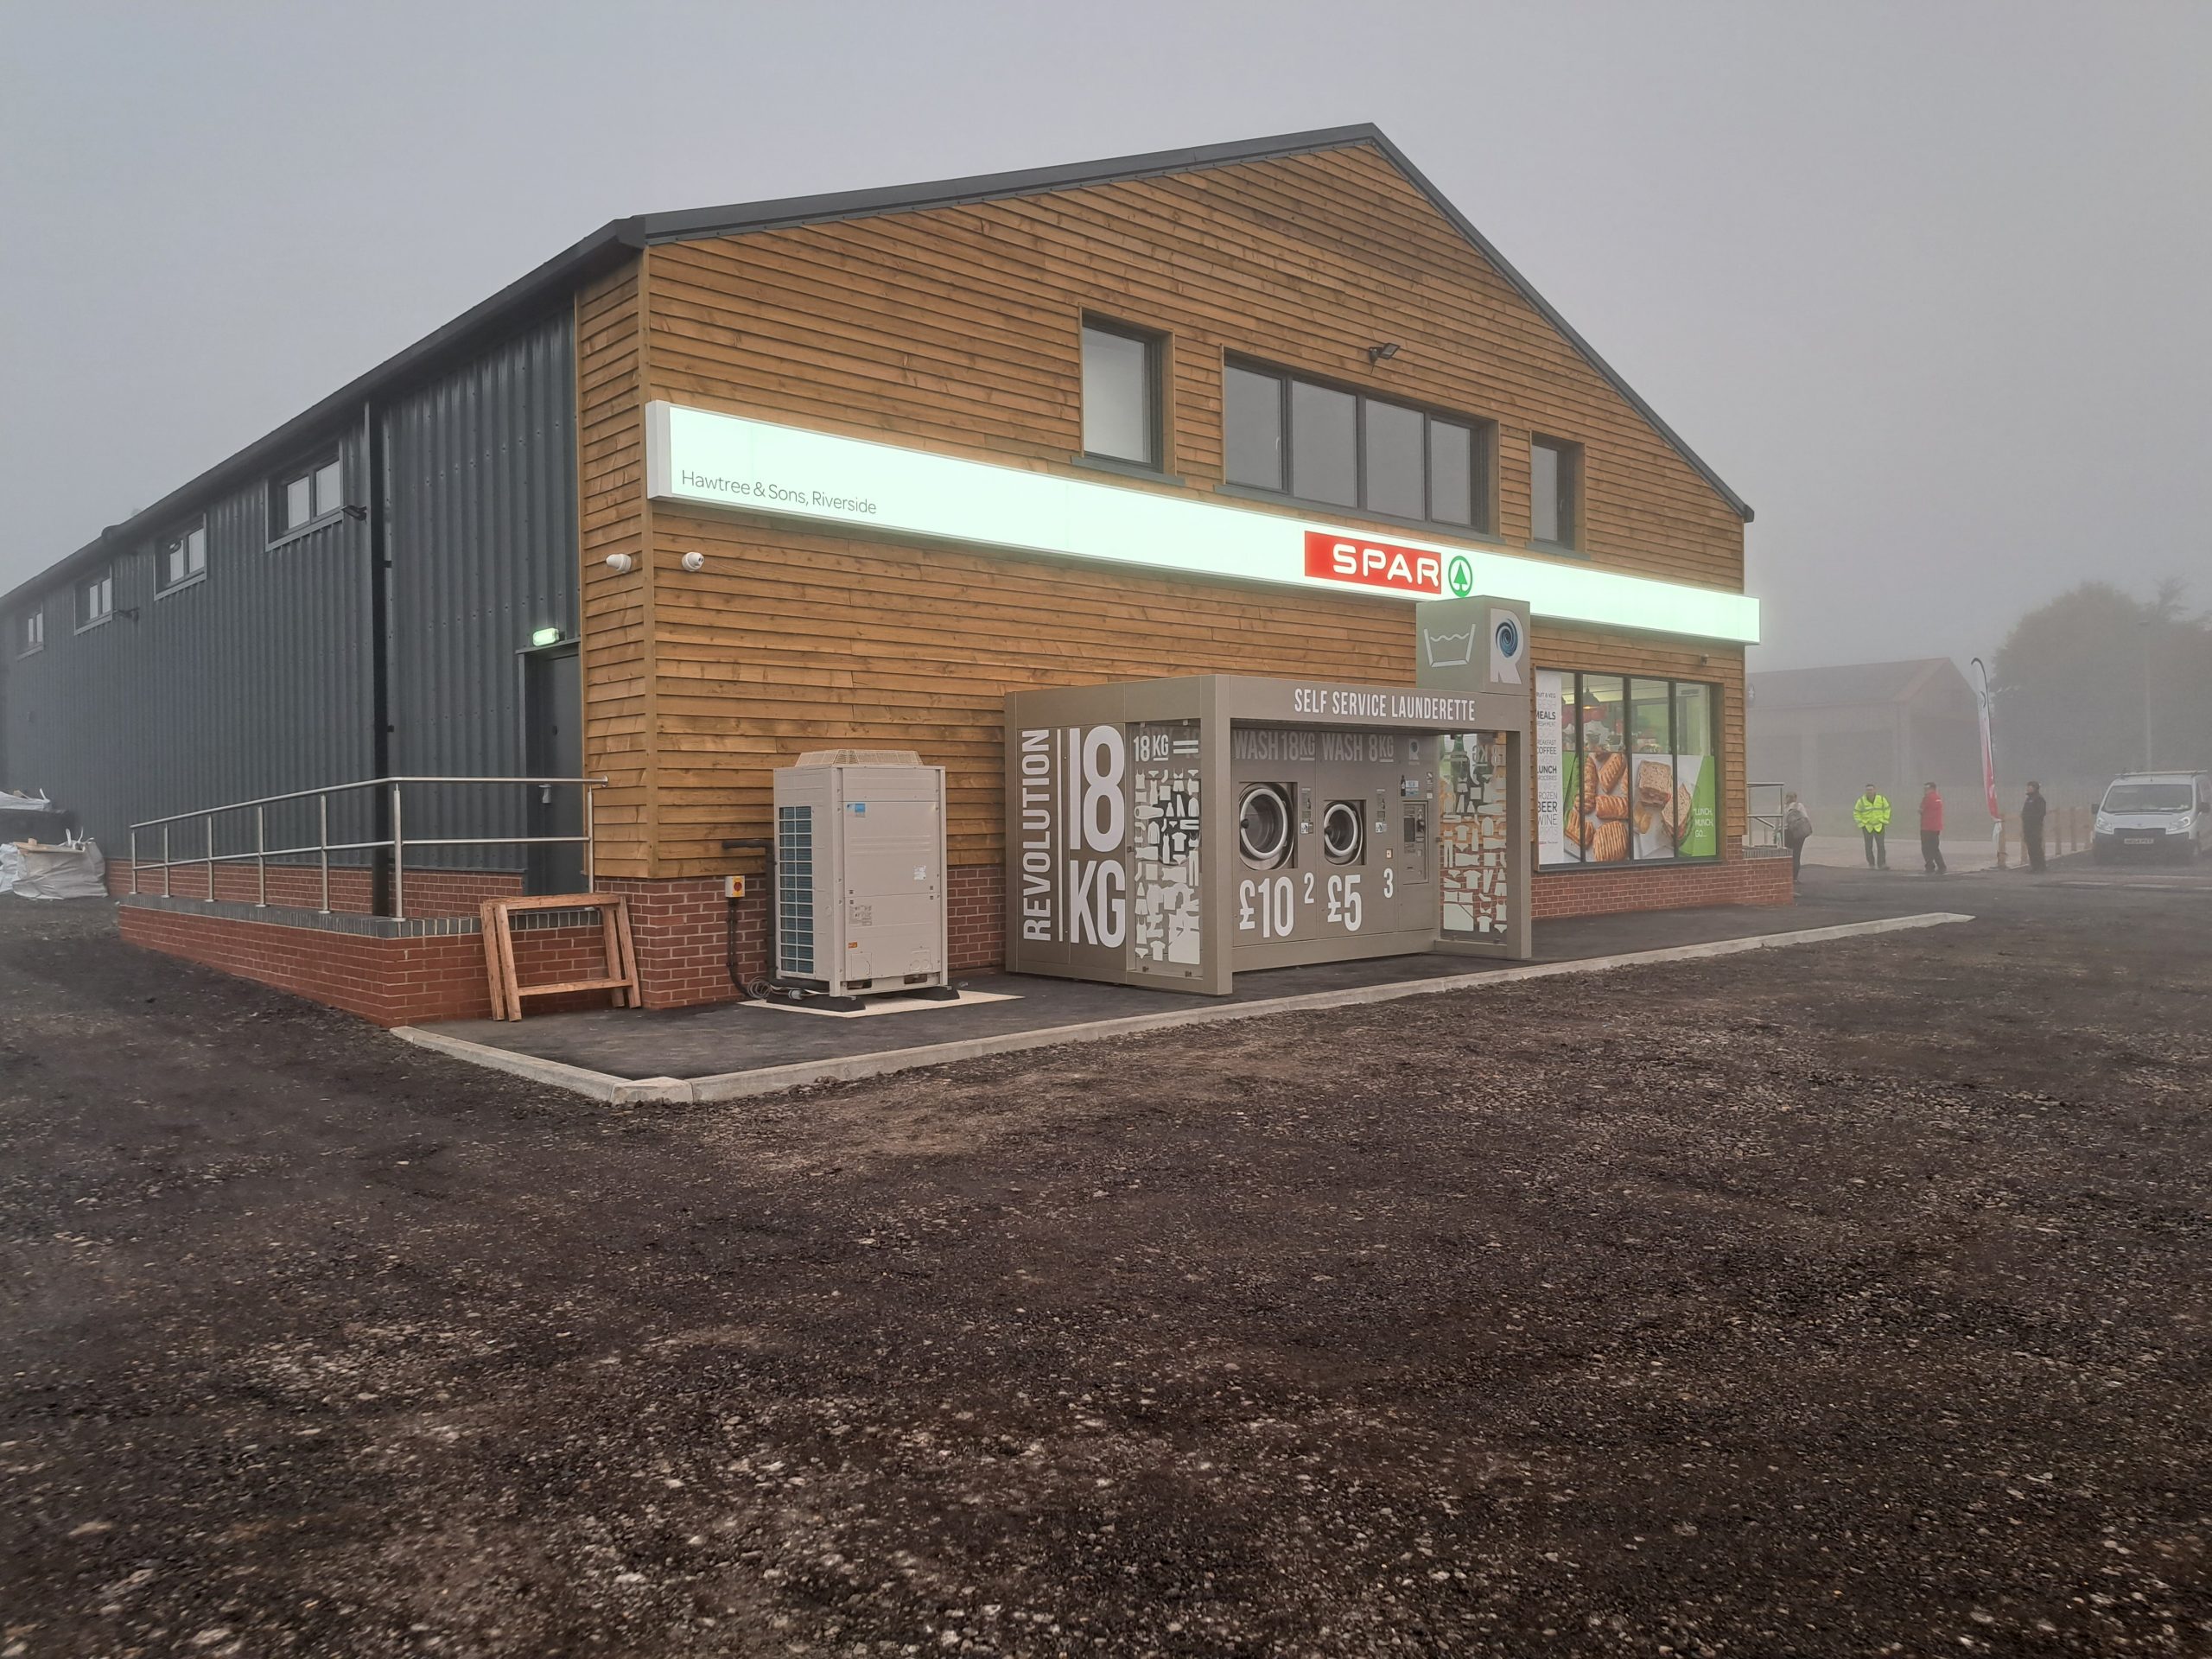 Family develops largest independent SPAR store in south west